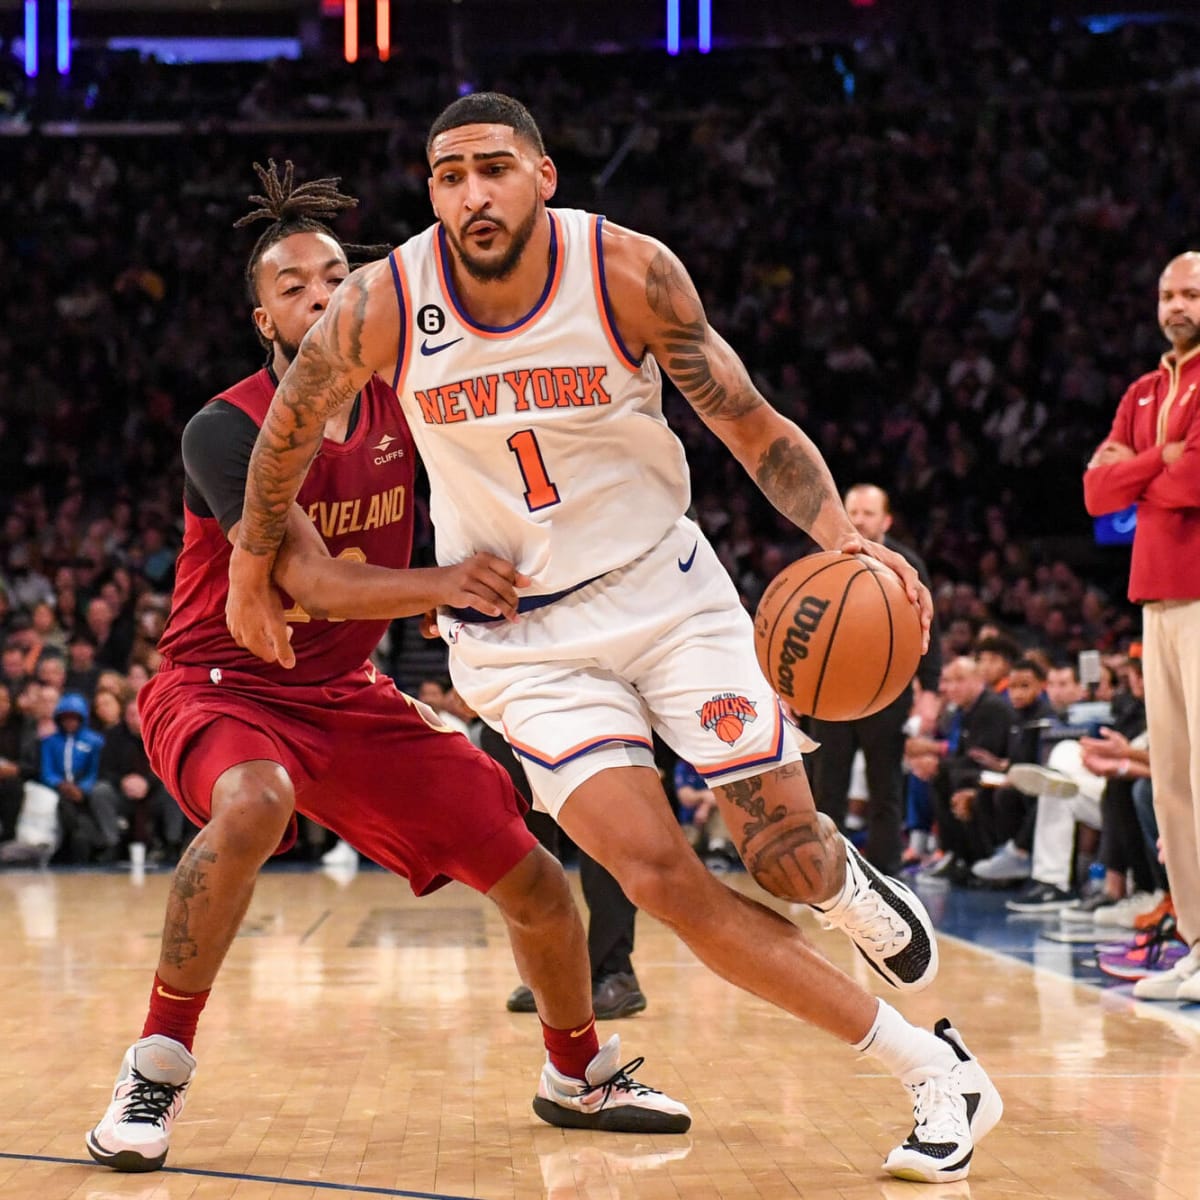 Obi Toppin opens up about Pacers trade, 'great time with the Knicks